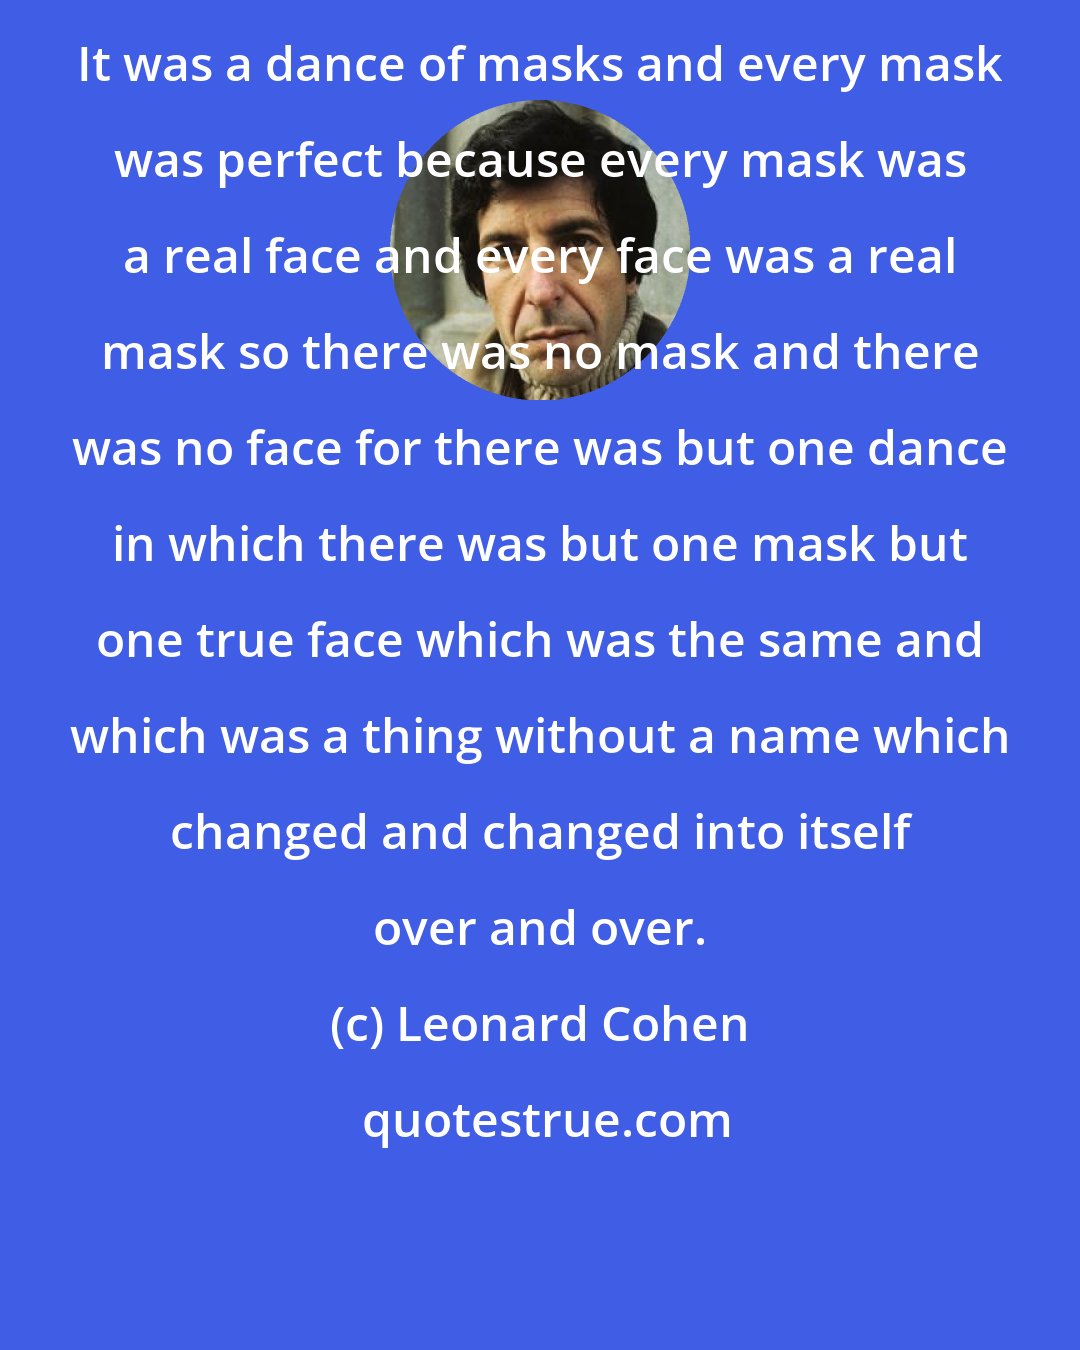 Leonard Cohen: It was a dance of masks and every mask was perfect because every mask was a real face and every face was a real mask so there was no mask and there was no face for there was but one dance in which there was but one mask but one true face which was the same and which was a thing without a name which changed and changed into itself over and over.